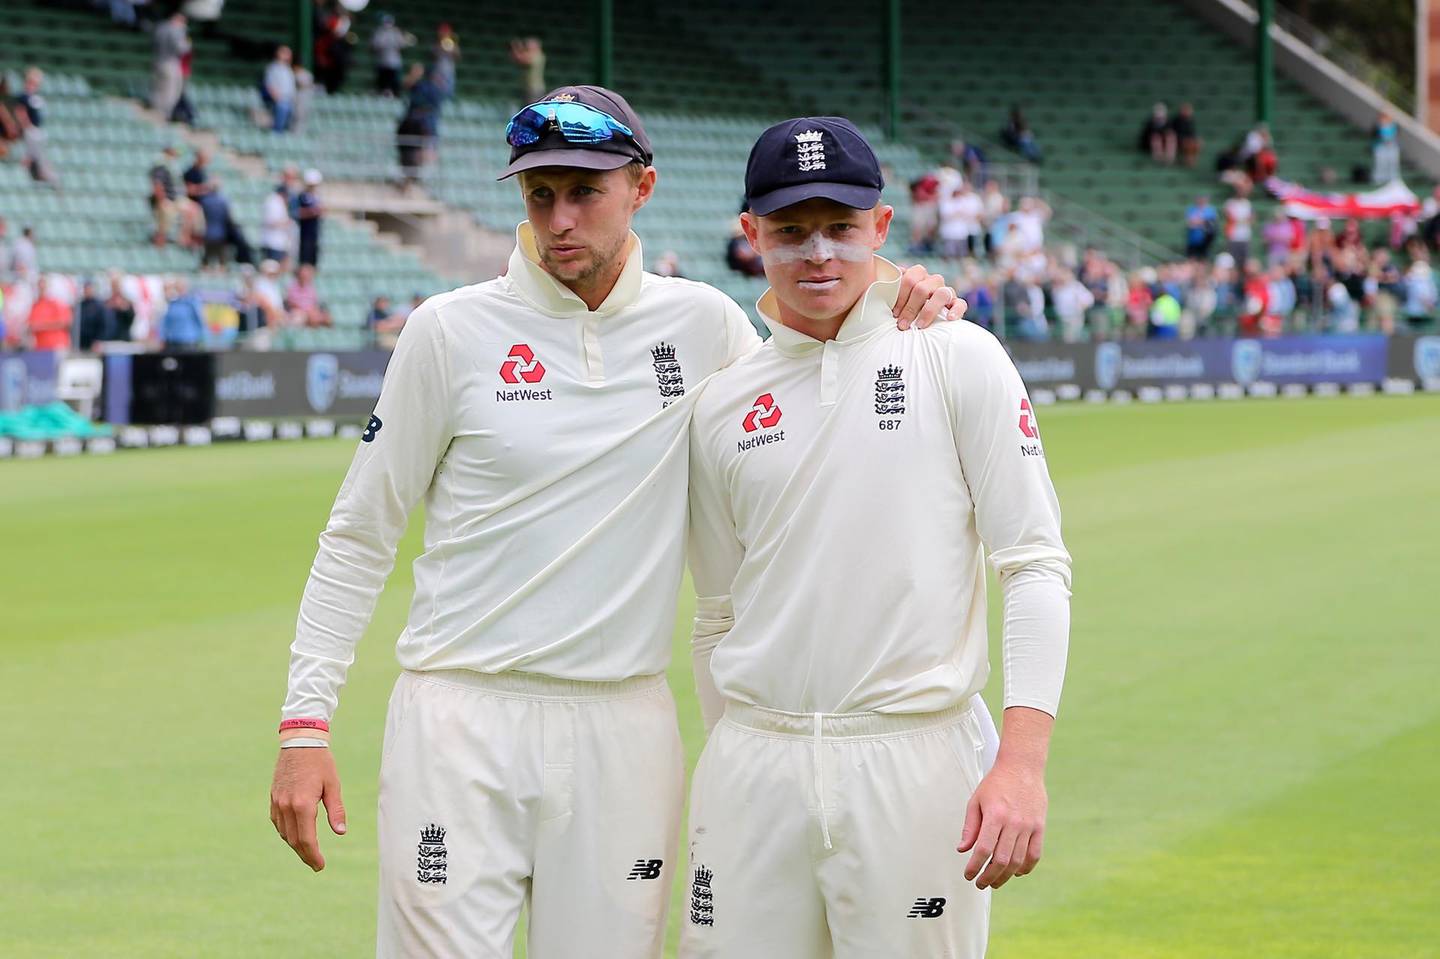 England's Joe Root (L) and England's Ollie Pope pose for a poartrait during the fifth day of the third Test cricket match between South Africa and England at the St George's Park Cricket Ground in Port Elizabeth on January 20, 2020 / AFP / Richard Huggard
